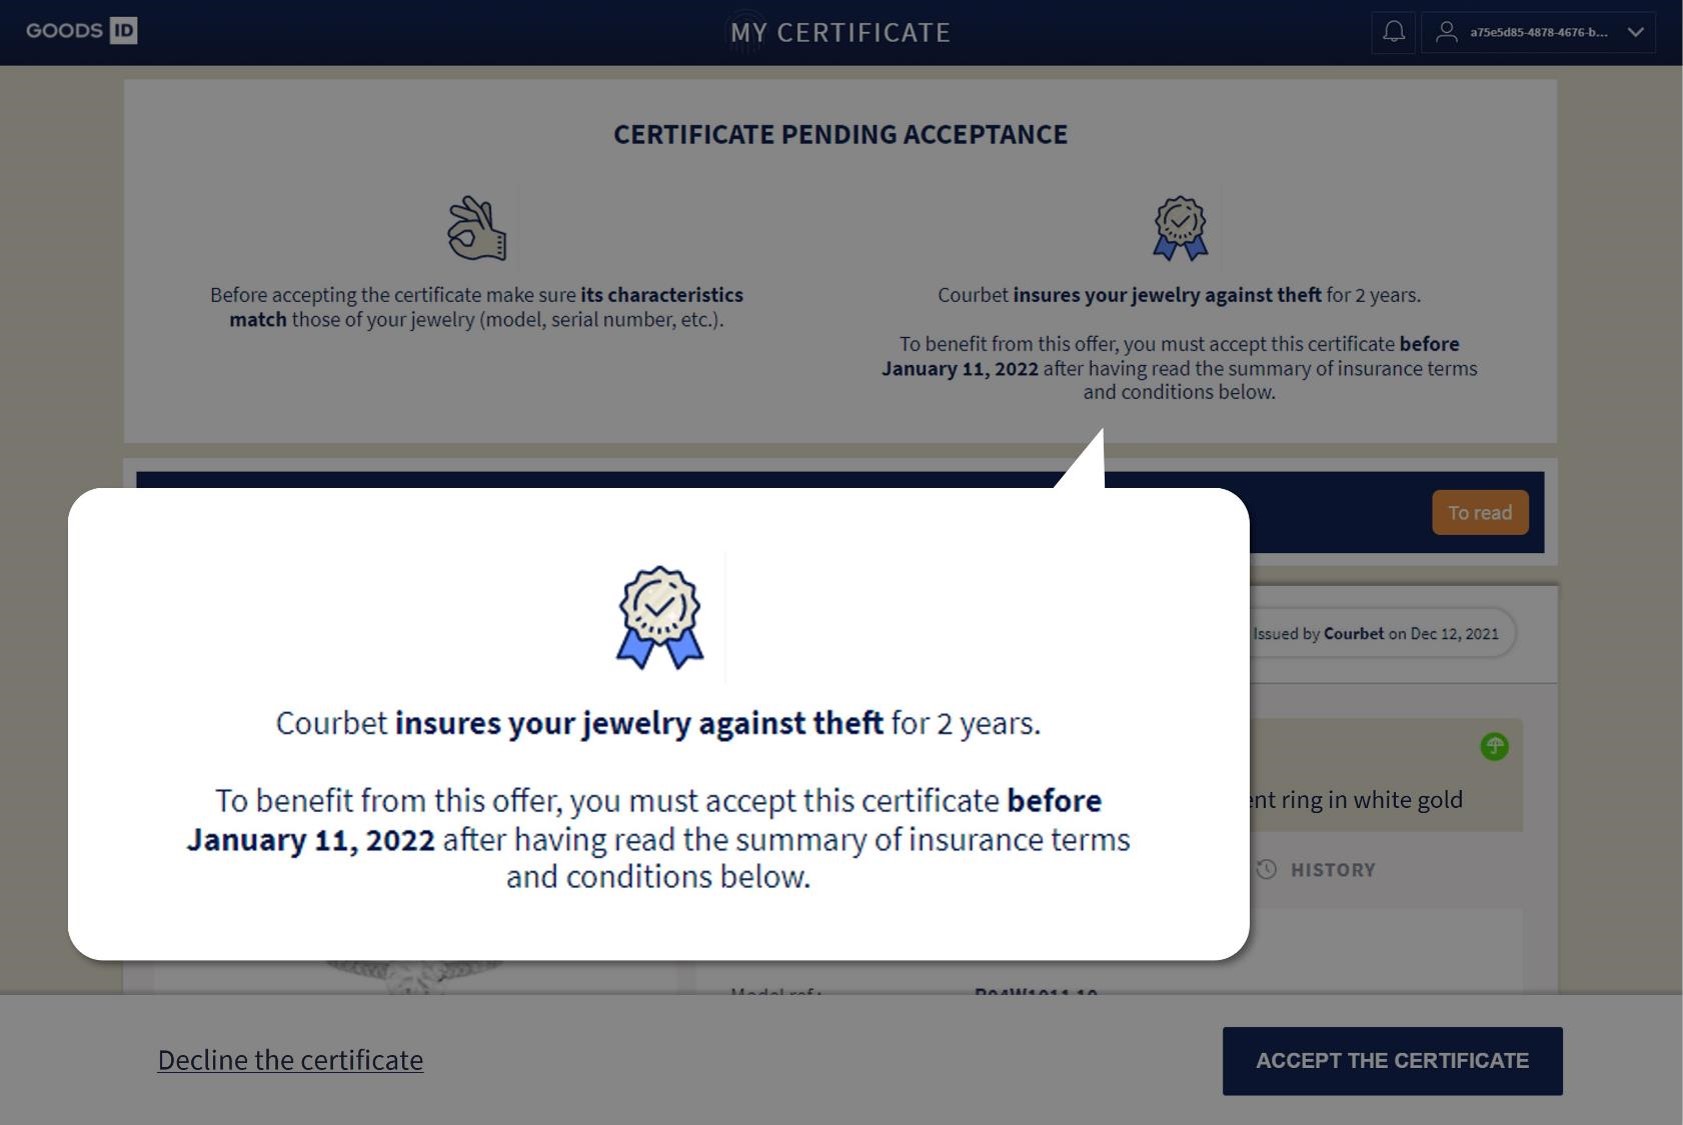 The insurance activation is boundto the certificate's acceptance